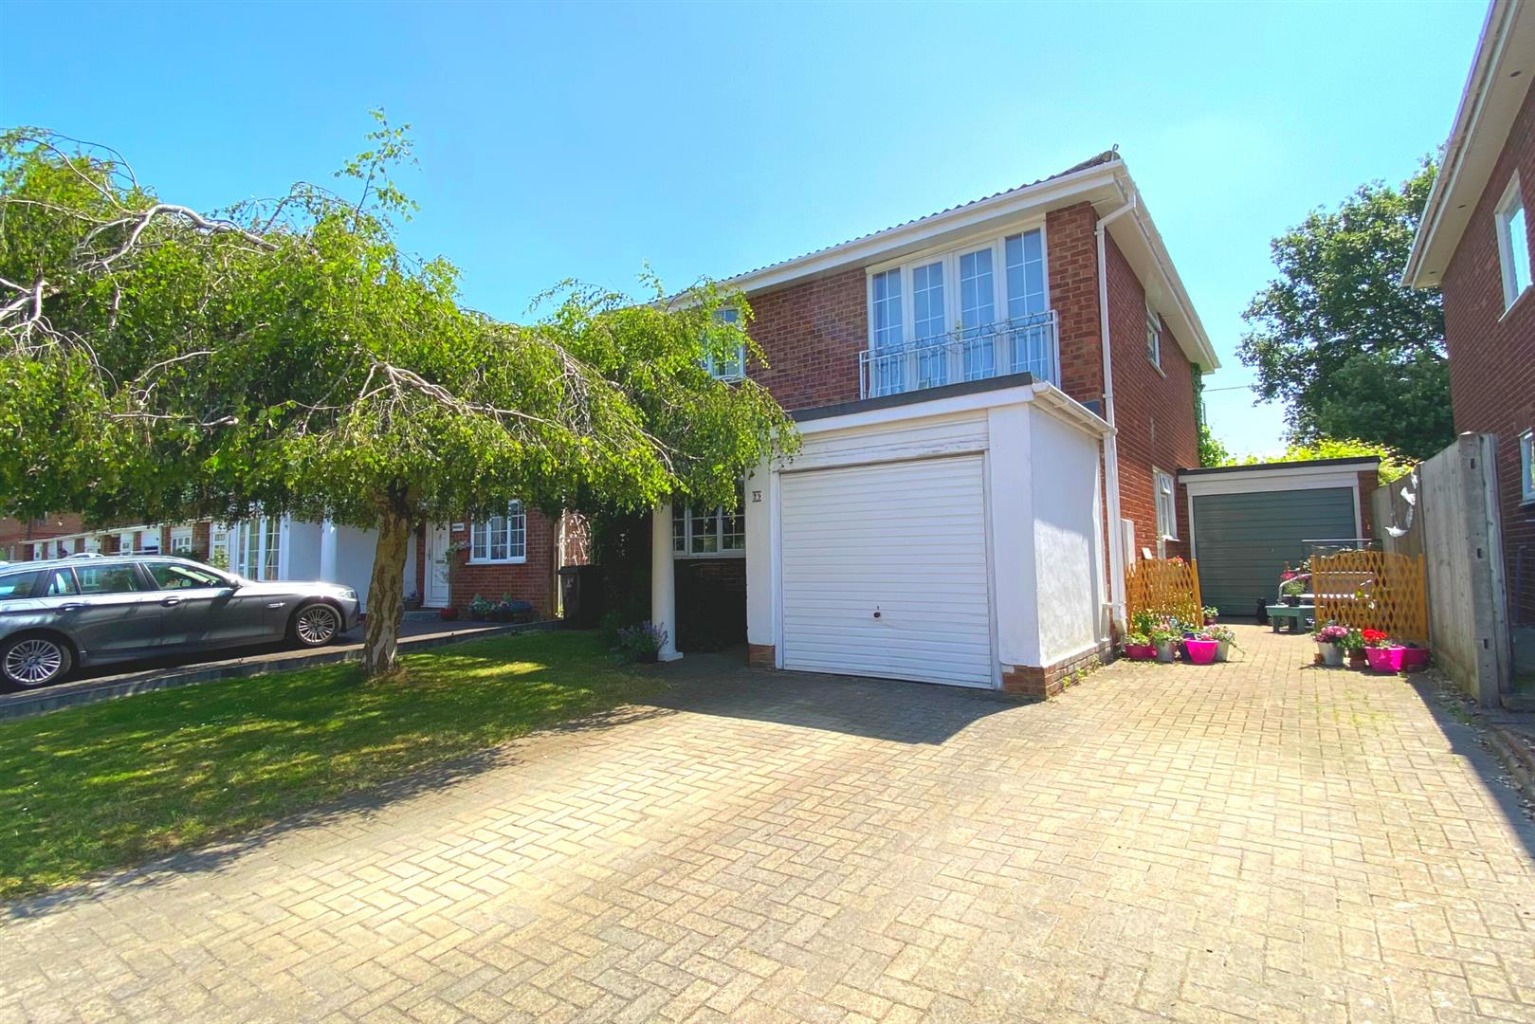 **Check out our property video**Listed by Dan** Are you looking for a family home with potential? Somewhere you can live a long time? Look no further! This home is fantastic, already offering a south-facing garden, 4 great bedrooms, 3 reception rooms...